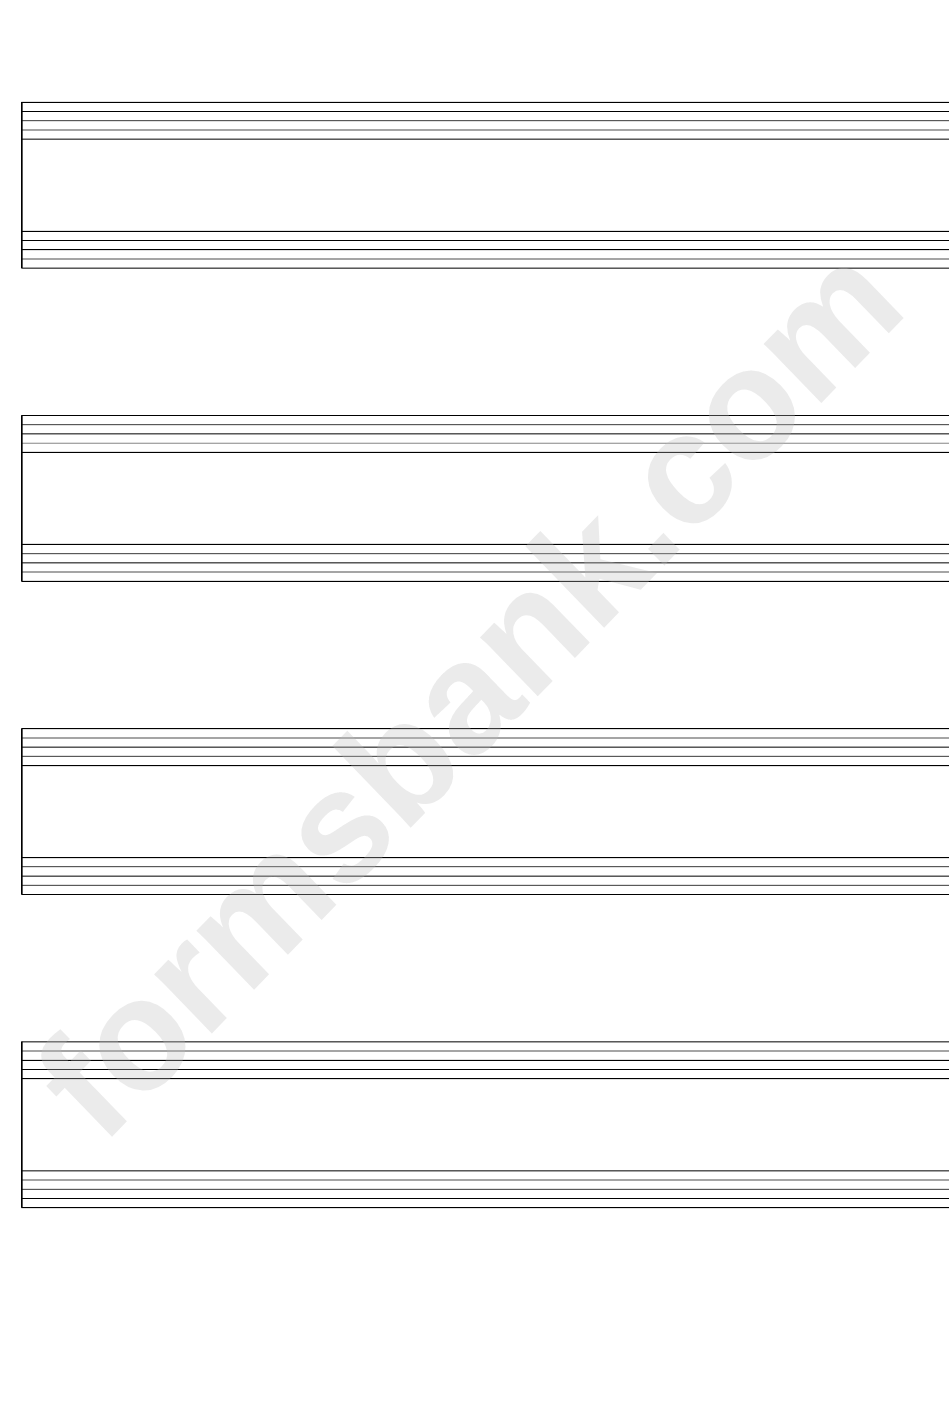 4-Stave, Duo Format (Space For Text), Blank Clefs (A4 Portrait) Blank Sheet Music